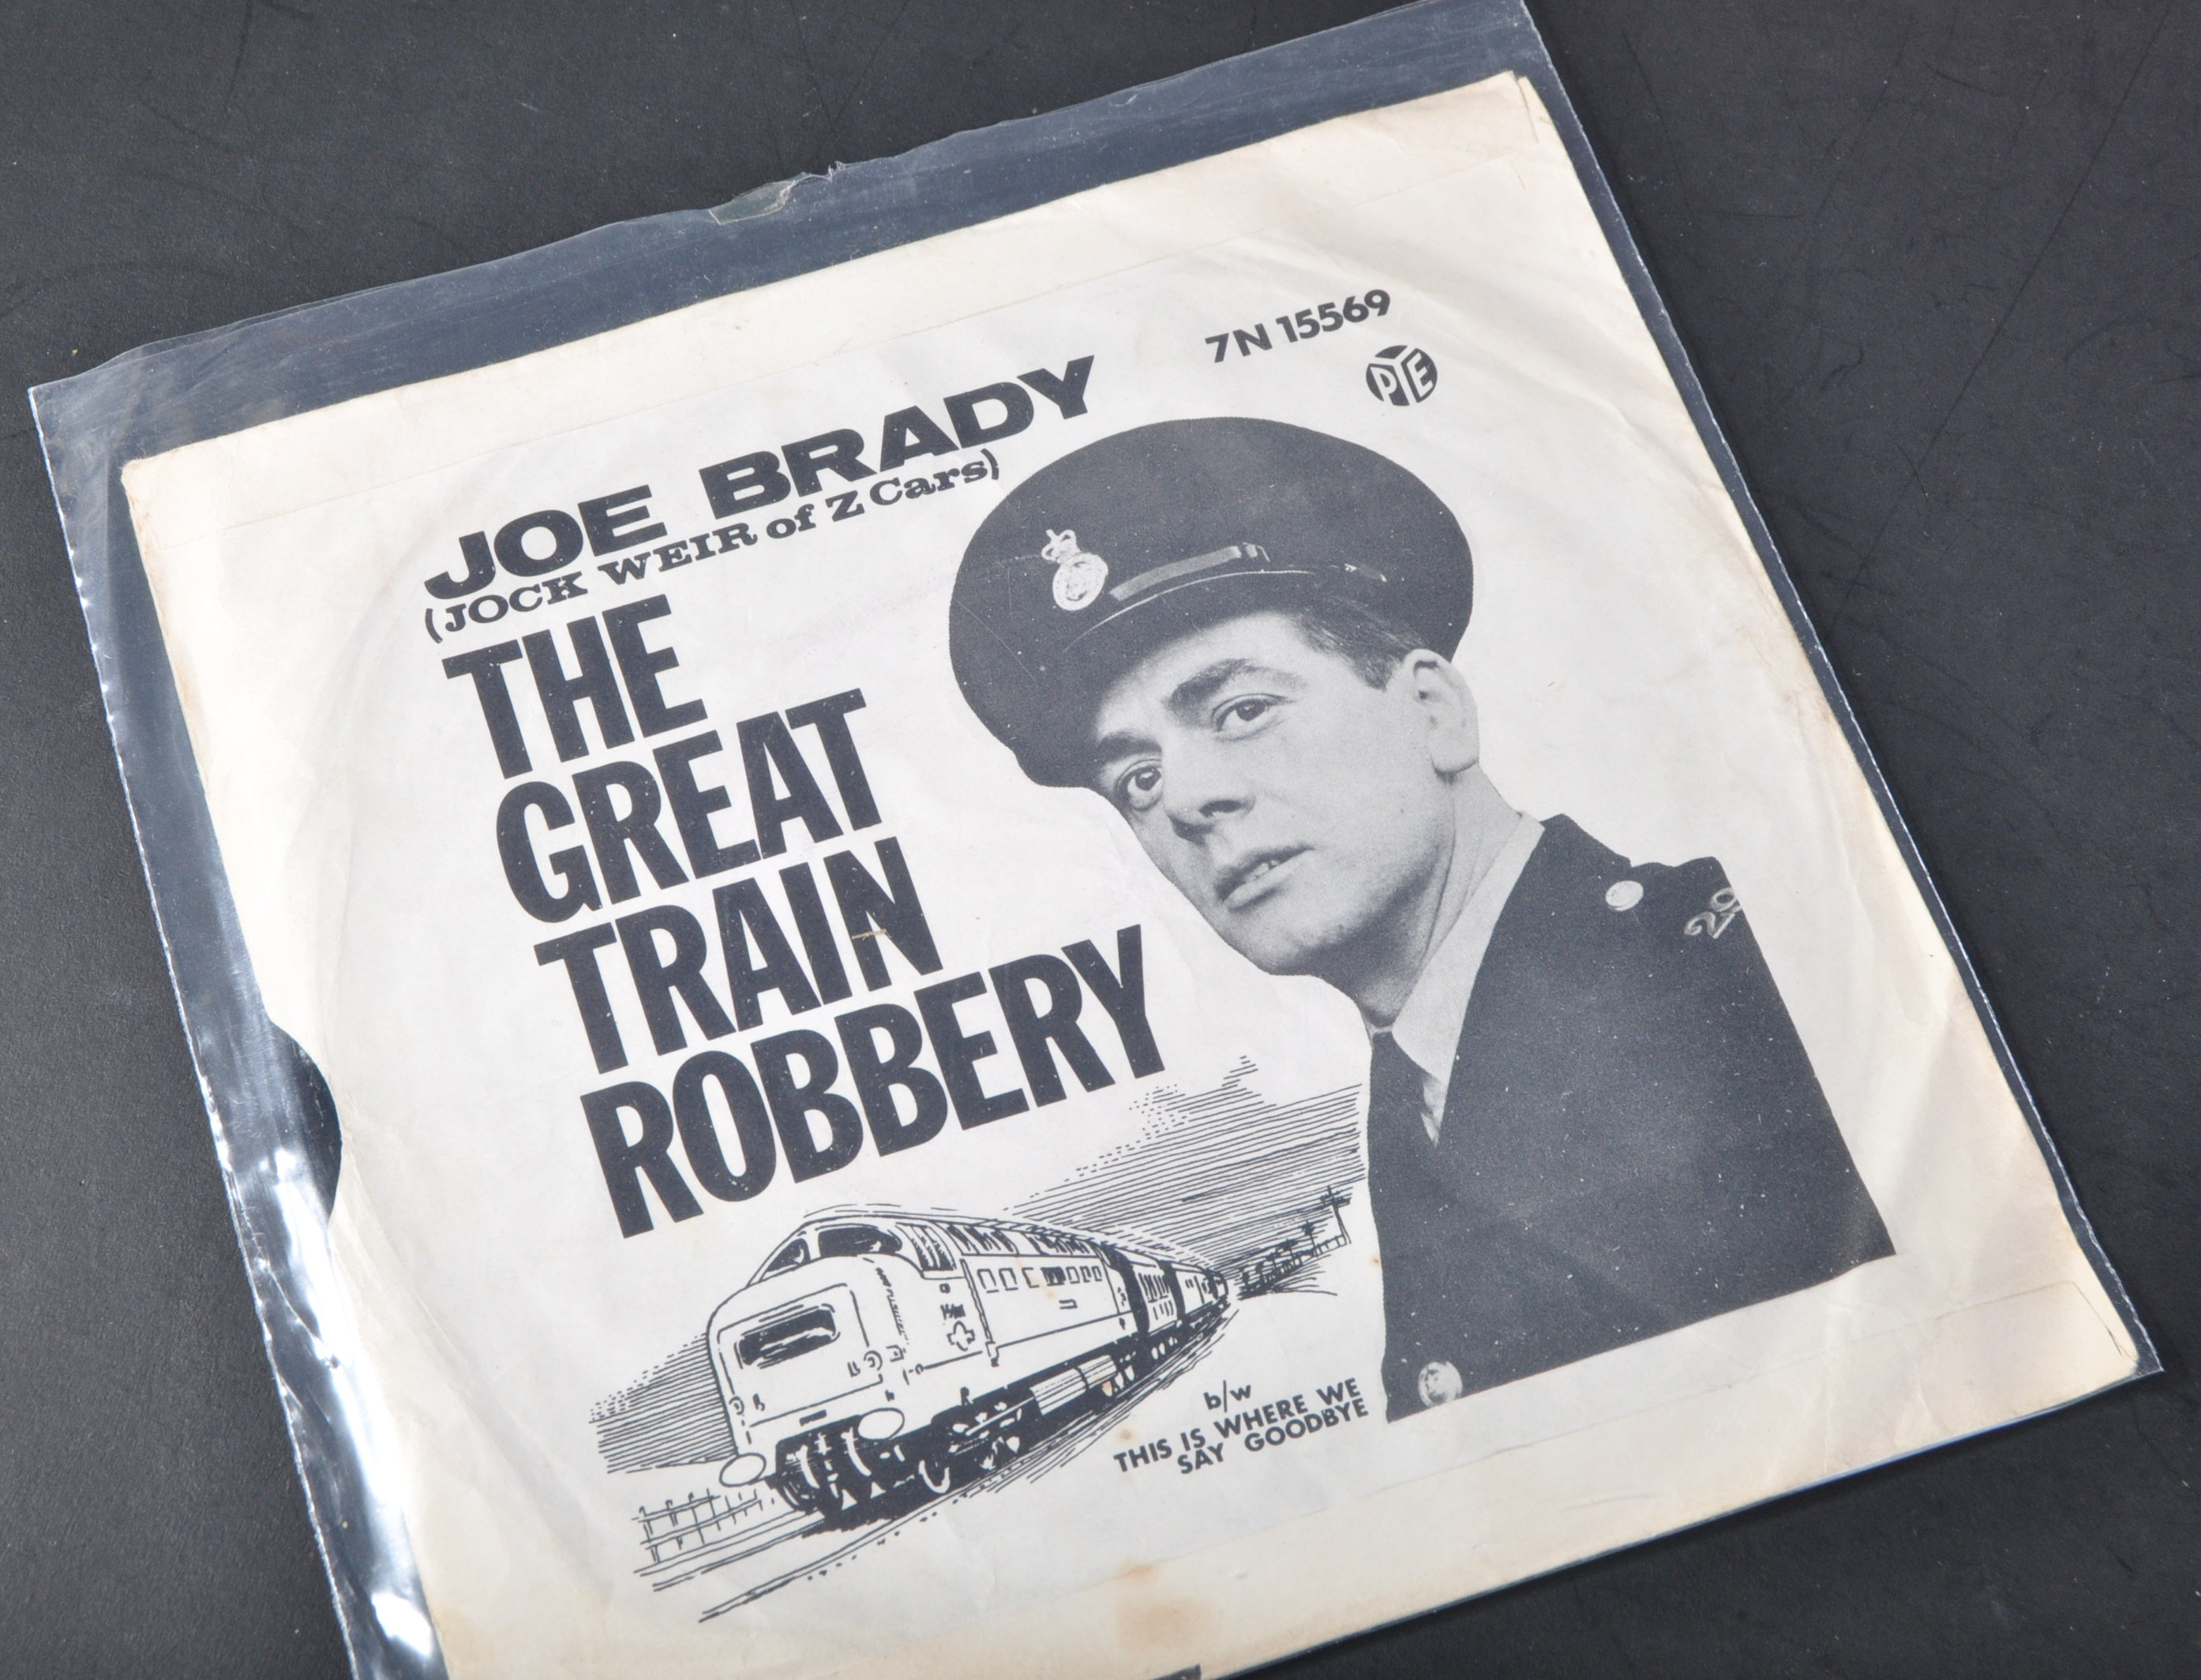 GREAT TRAIN ROBBERY - RONNIE BIGGS / ROBBERY RELATED RECORDS - Image 5 of 6